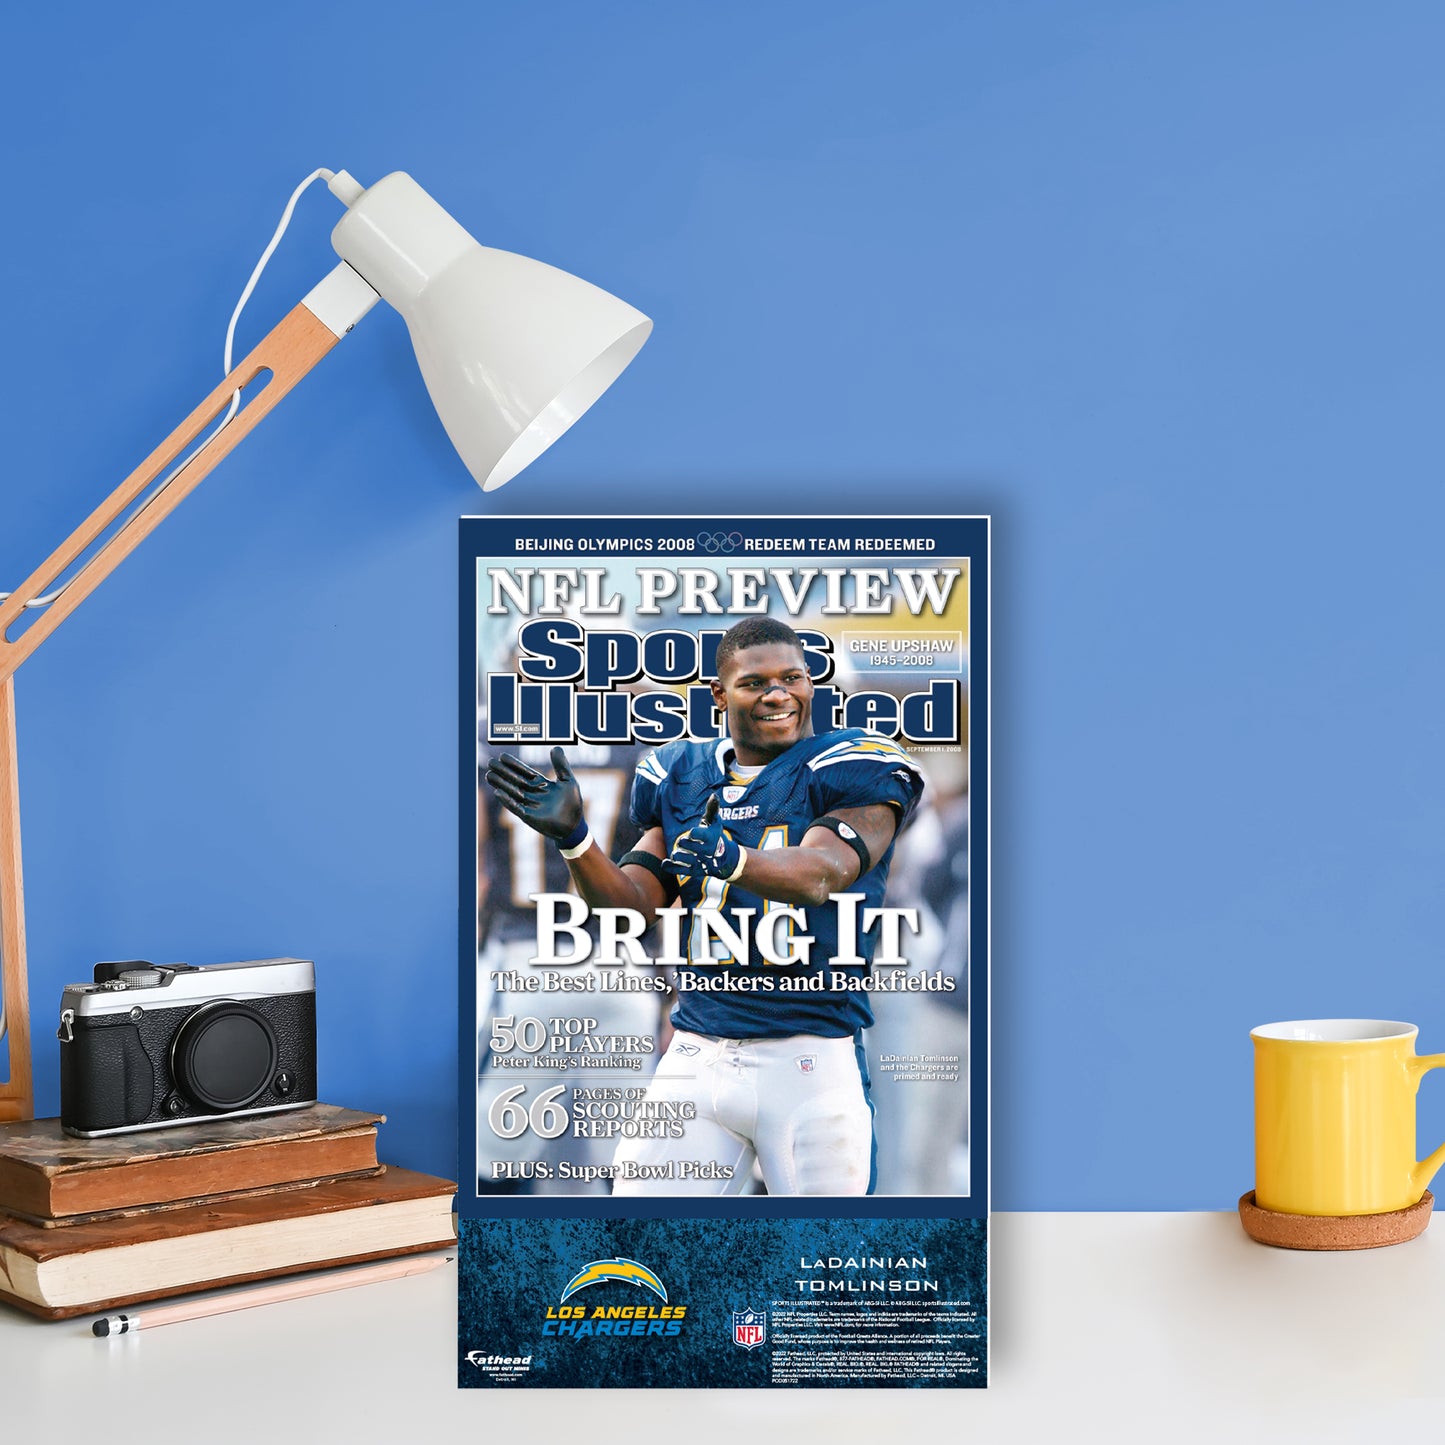 San Diego Chargers: LaDainian Tomlinson September 2008 Sports Illustrated Cover  Mini   Cardstock Cutout  - Officially Licensed NFL    Stand Out